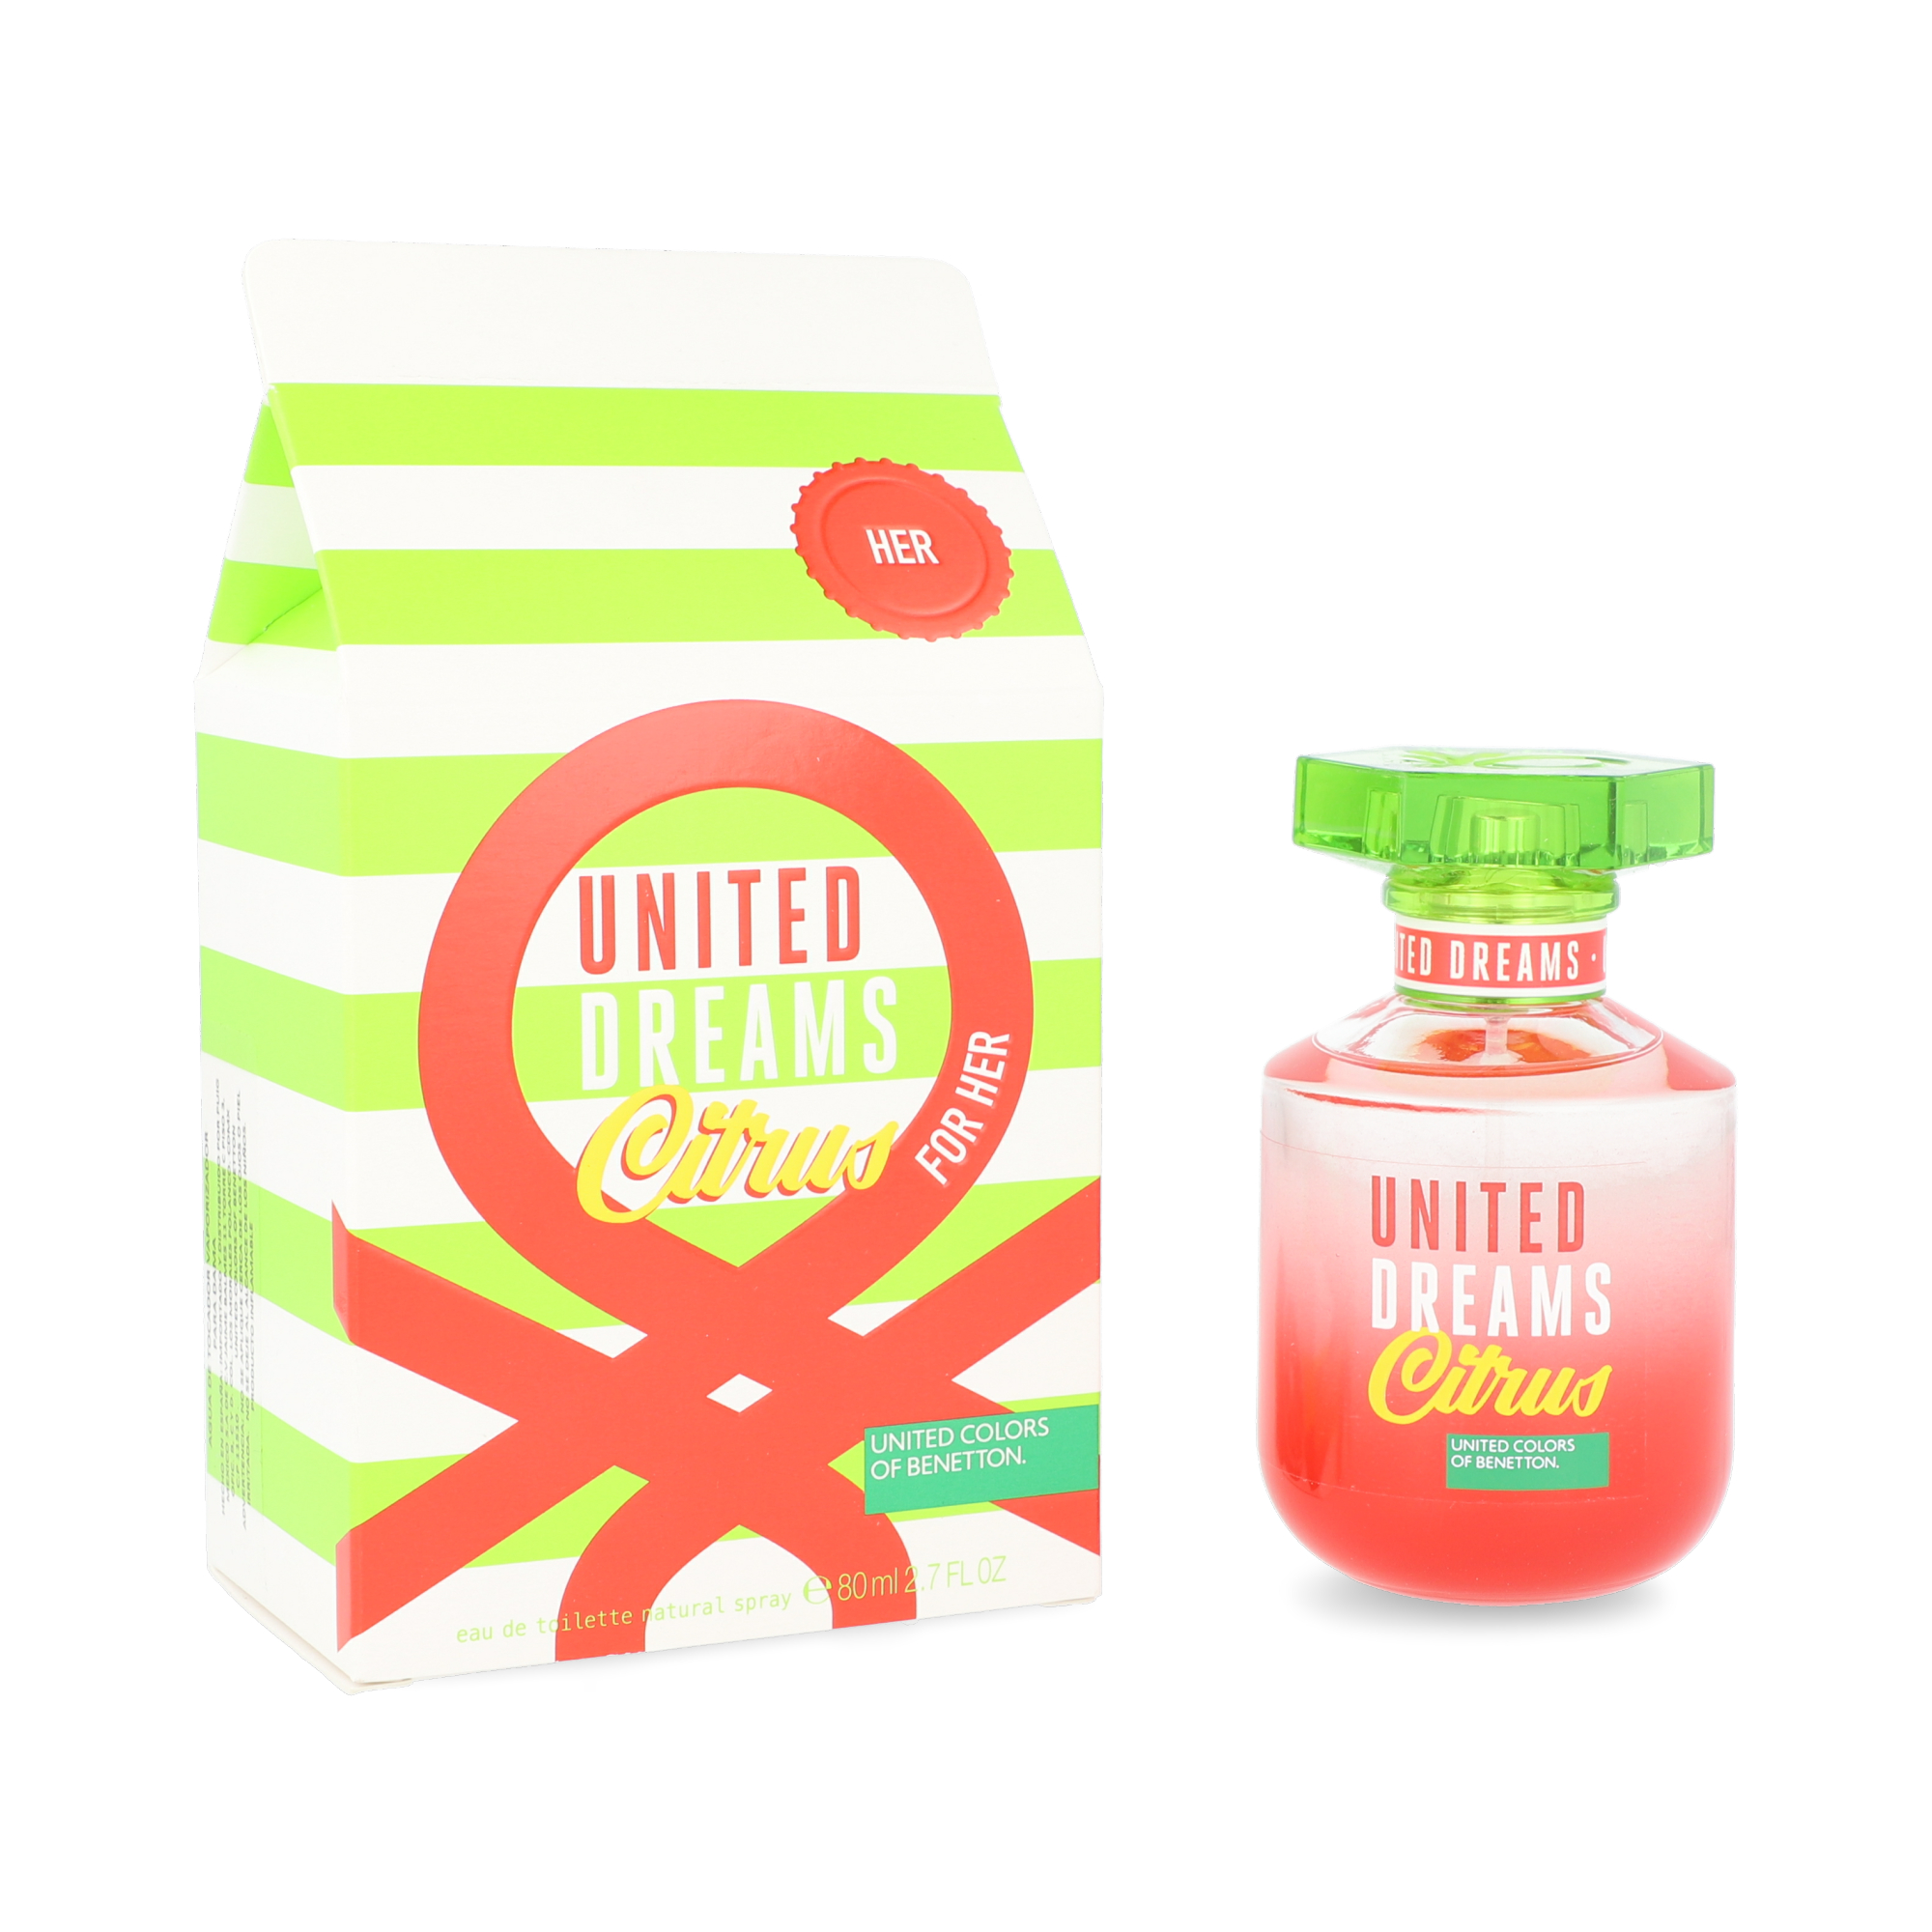 UNITED DREAMS CITRUS FOR HER 80ML EDT SPRAY